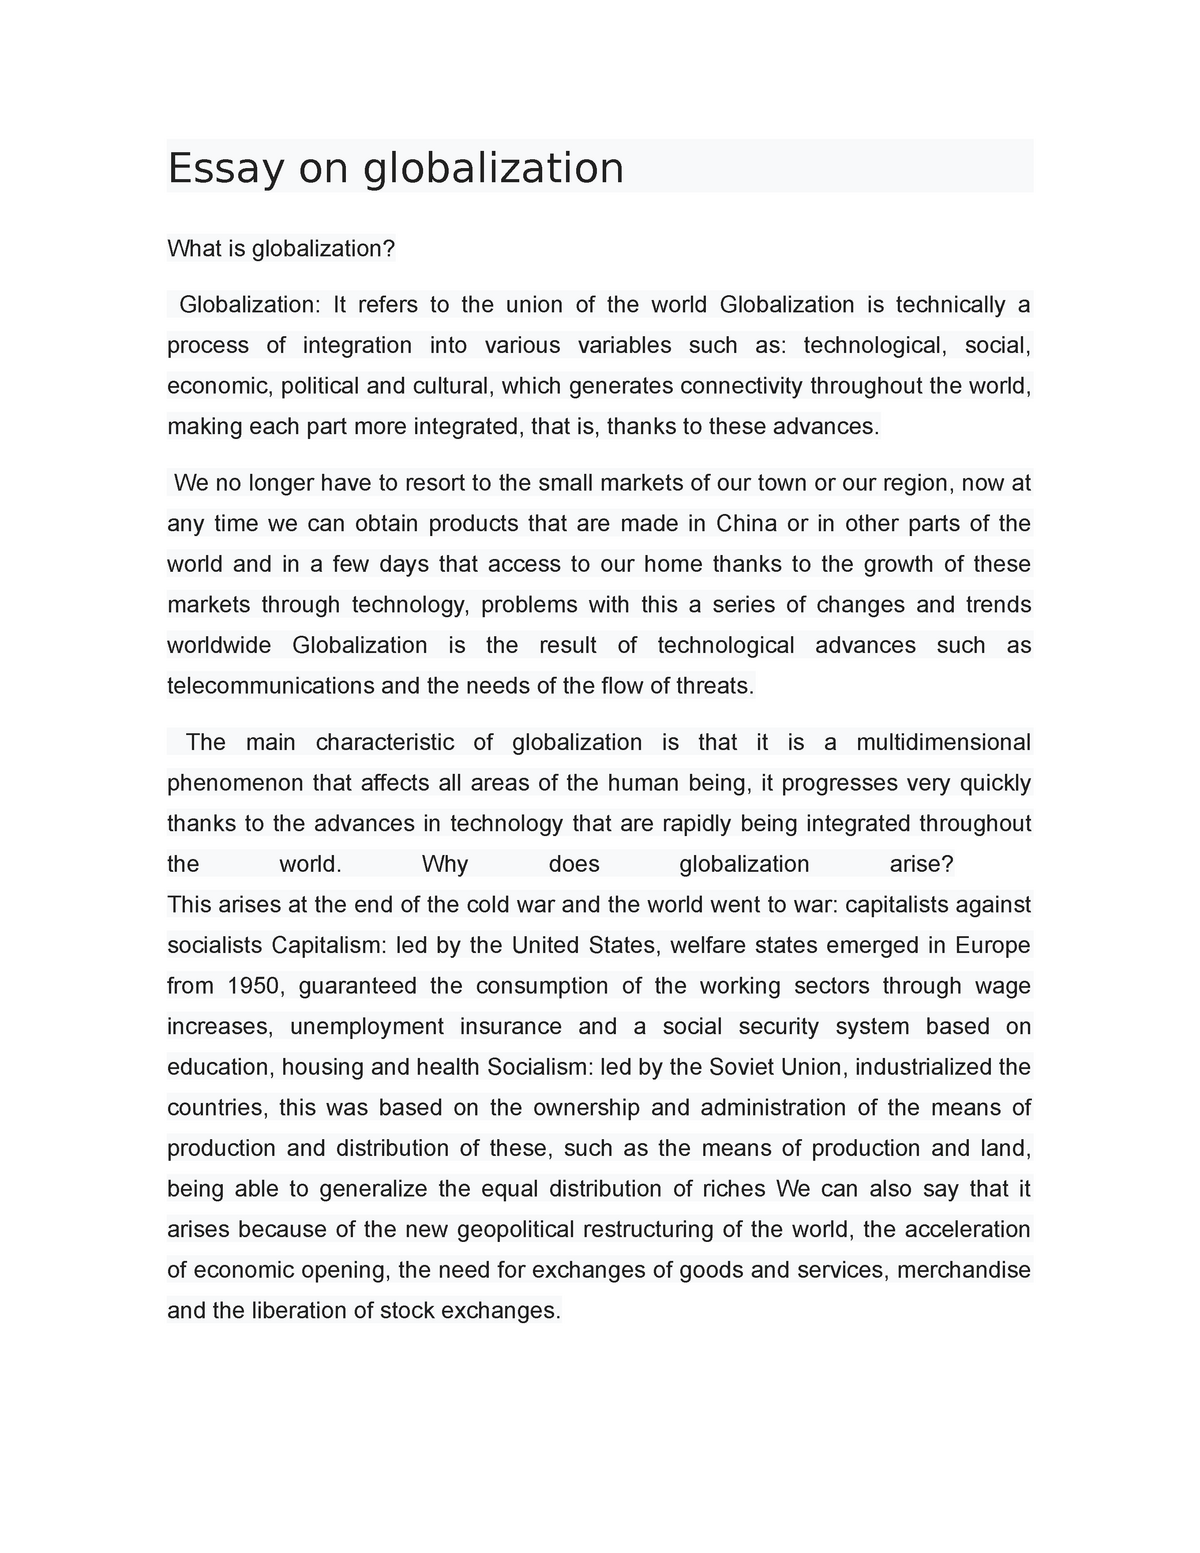 aspects of globalization essay